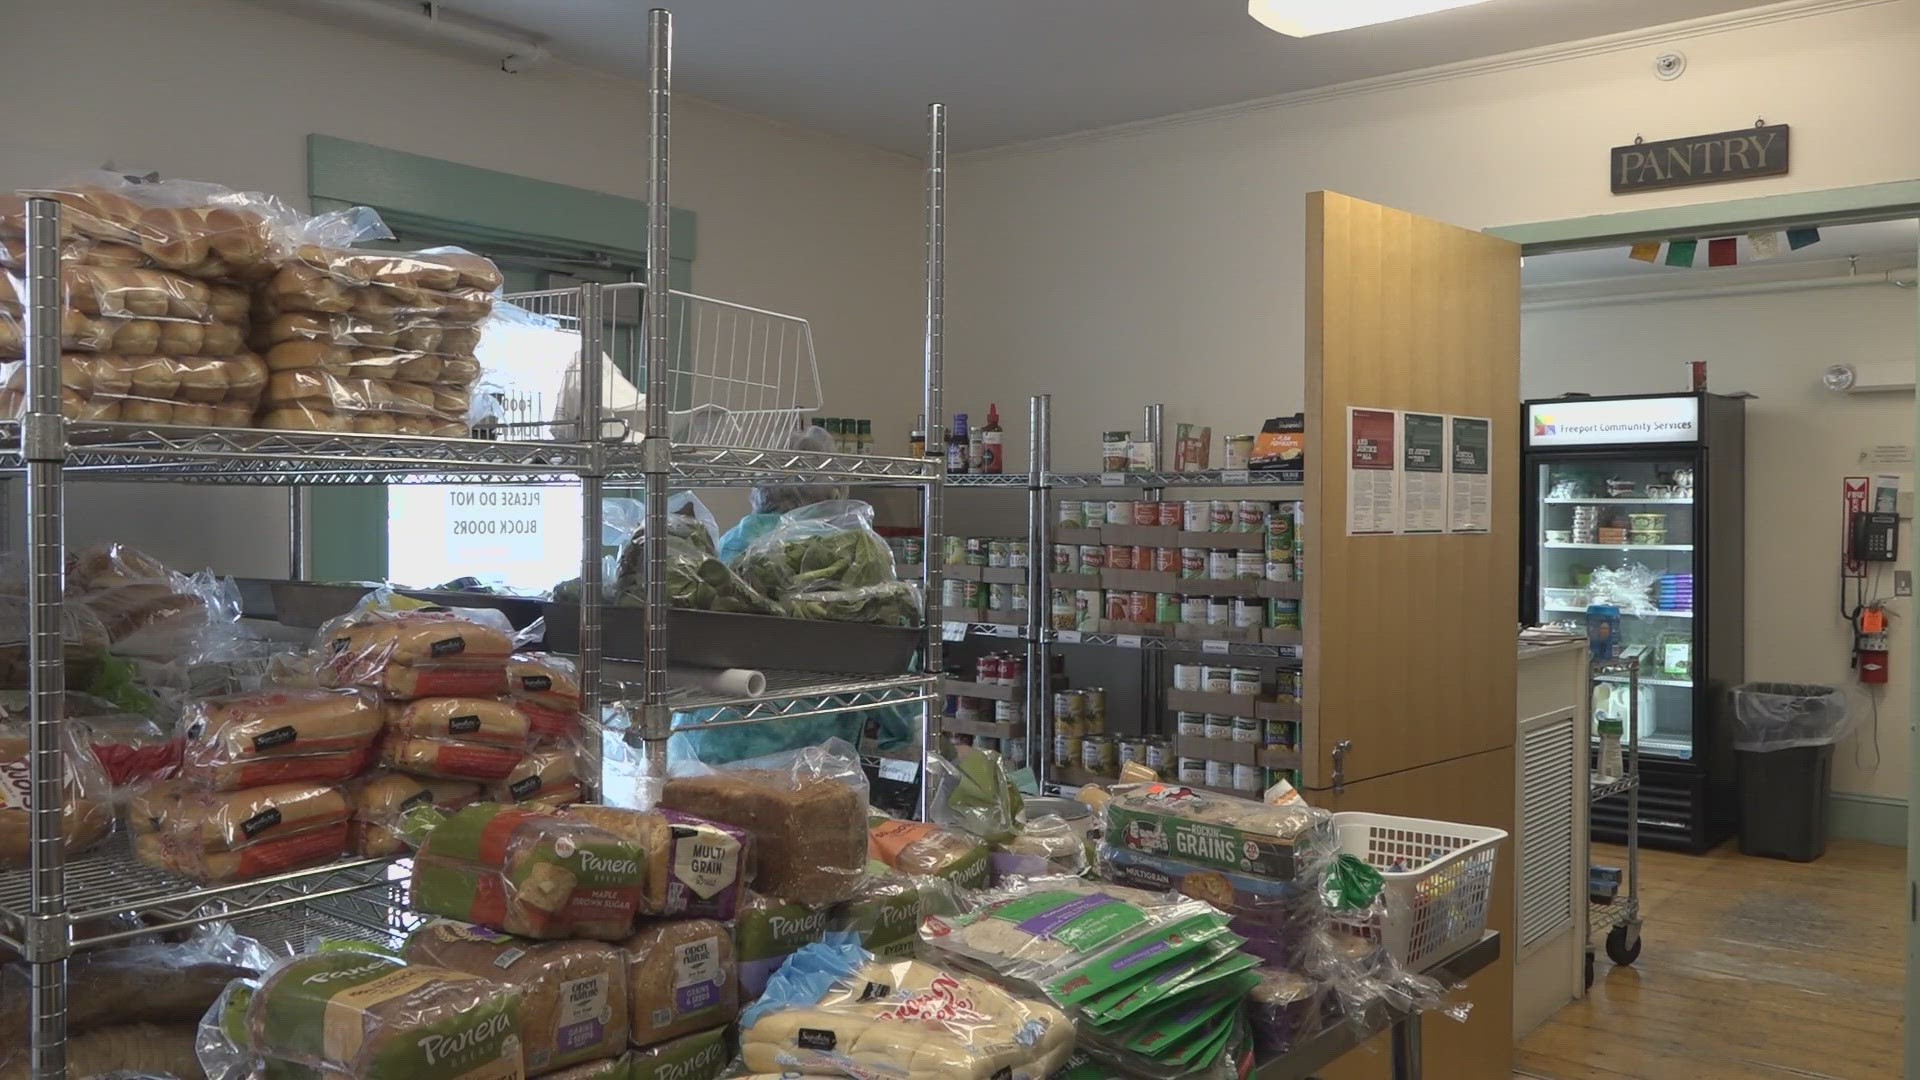 Pantries statewide saw a dip in produce on their shelves after several grocery stores and vital pantry donors lost power during recent storms.